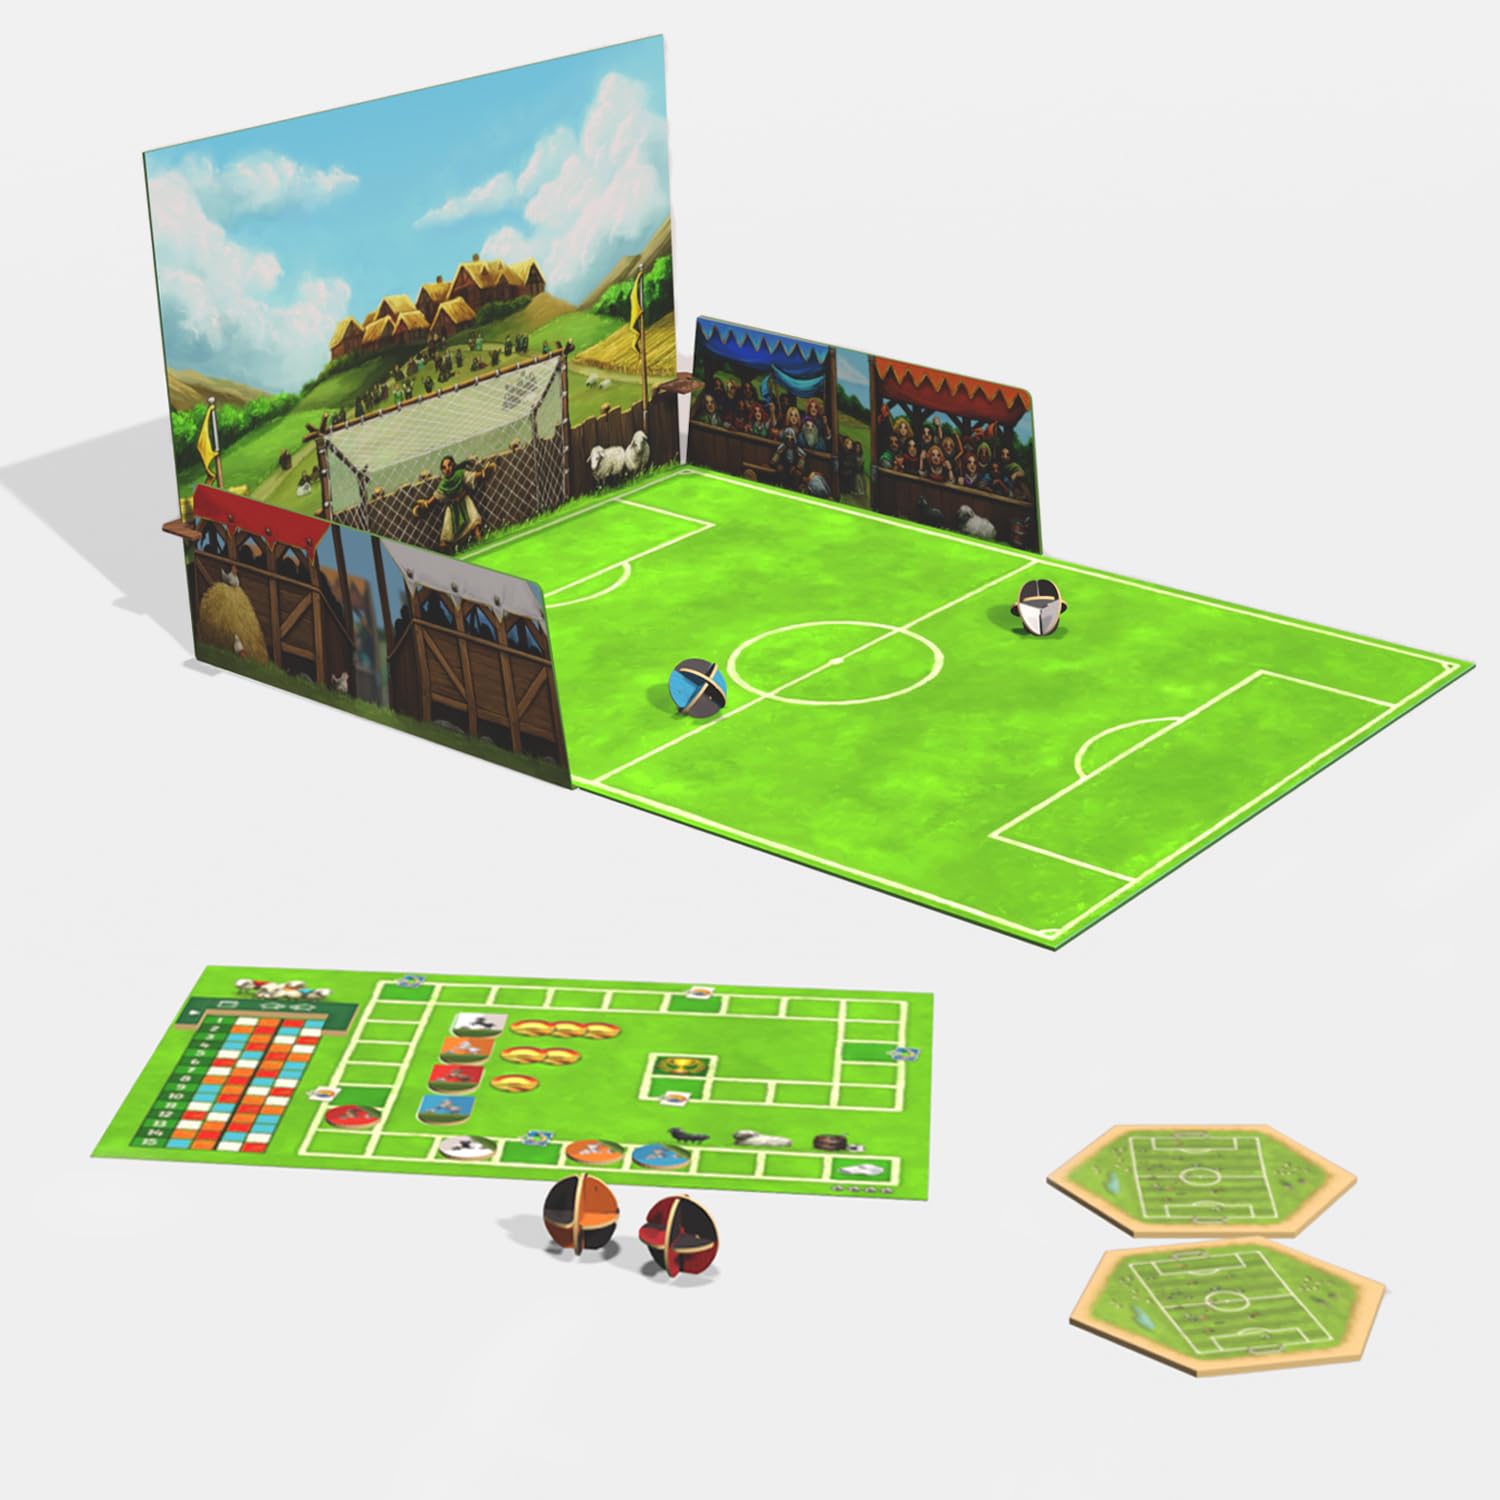 Catan Soccer Fever Scenario Expansion | Strategy Board Game | Adventure Game | Family Game for Adults and Kids | Ages 10+ | 3-4 Players | Average Playtime 75 Minutes | Made by CATAN Studio